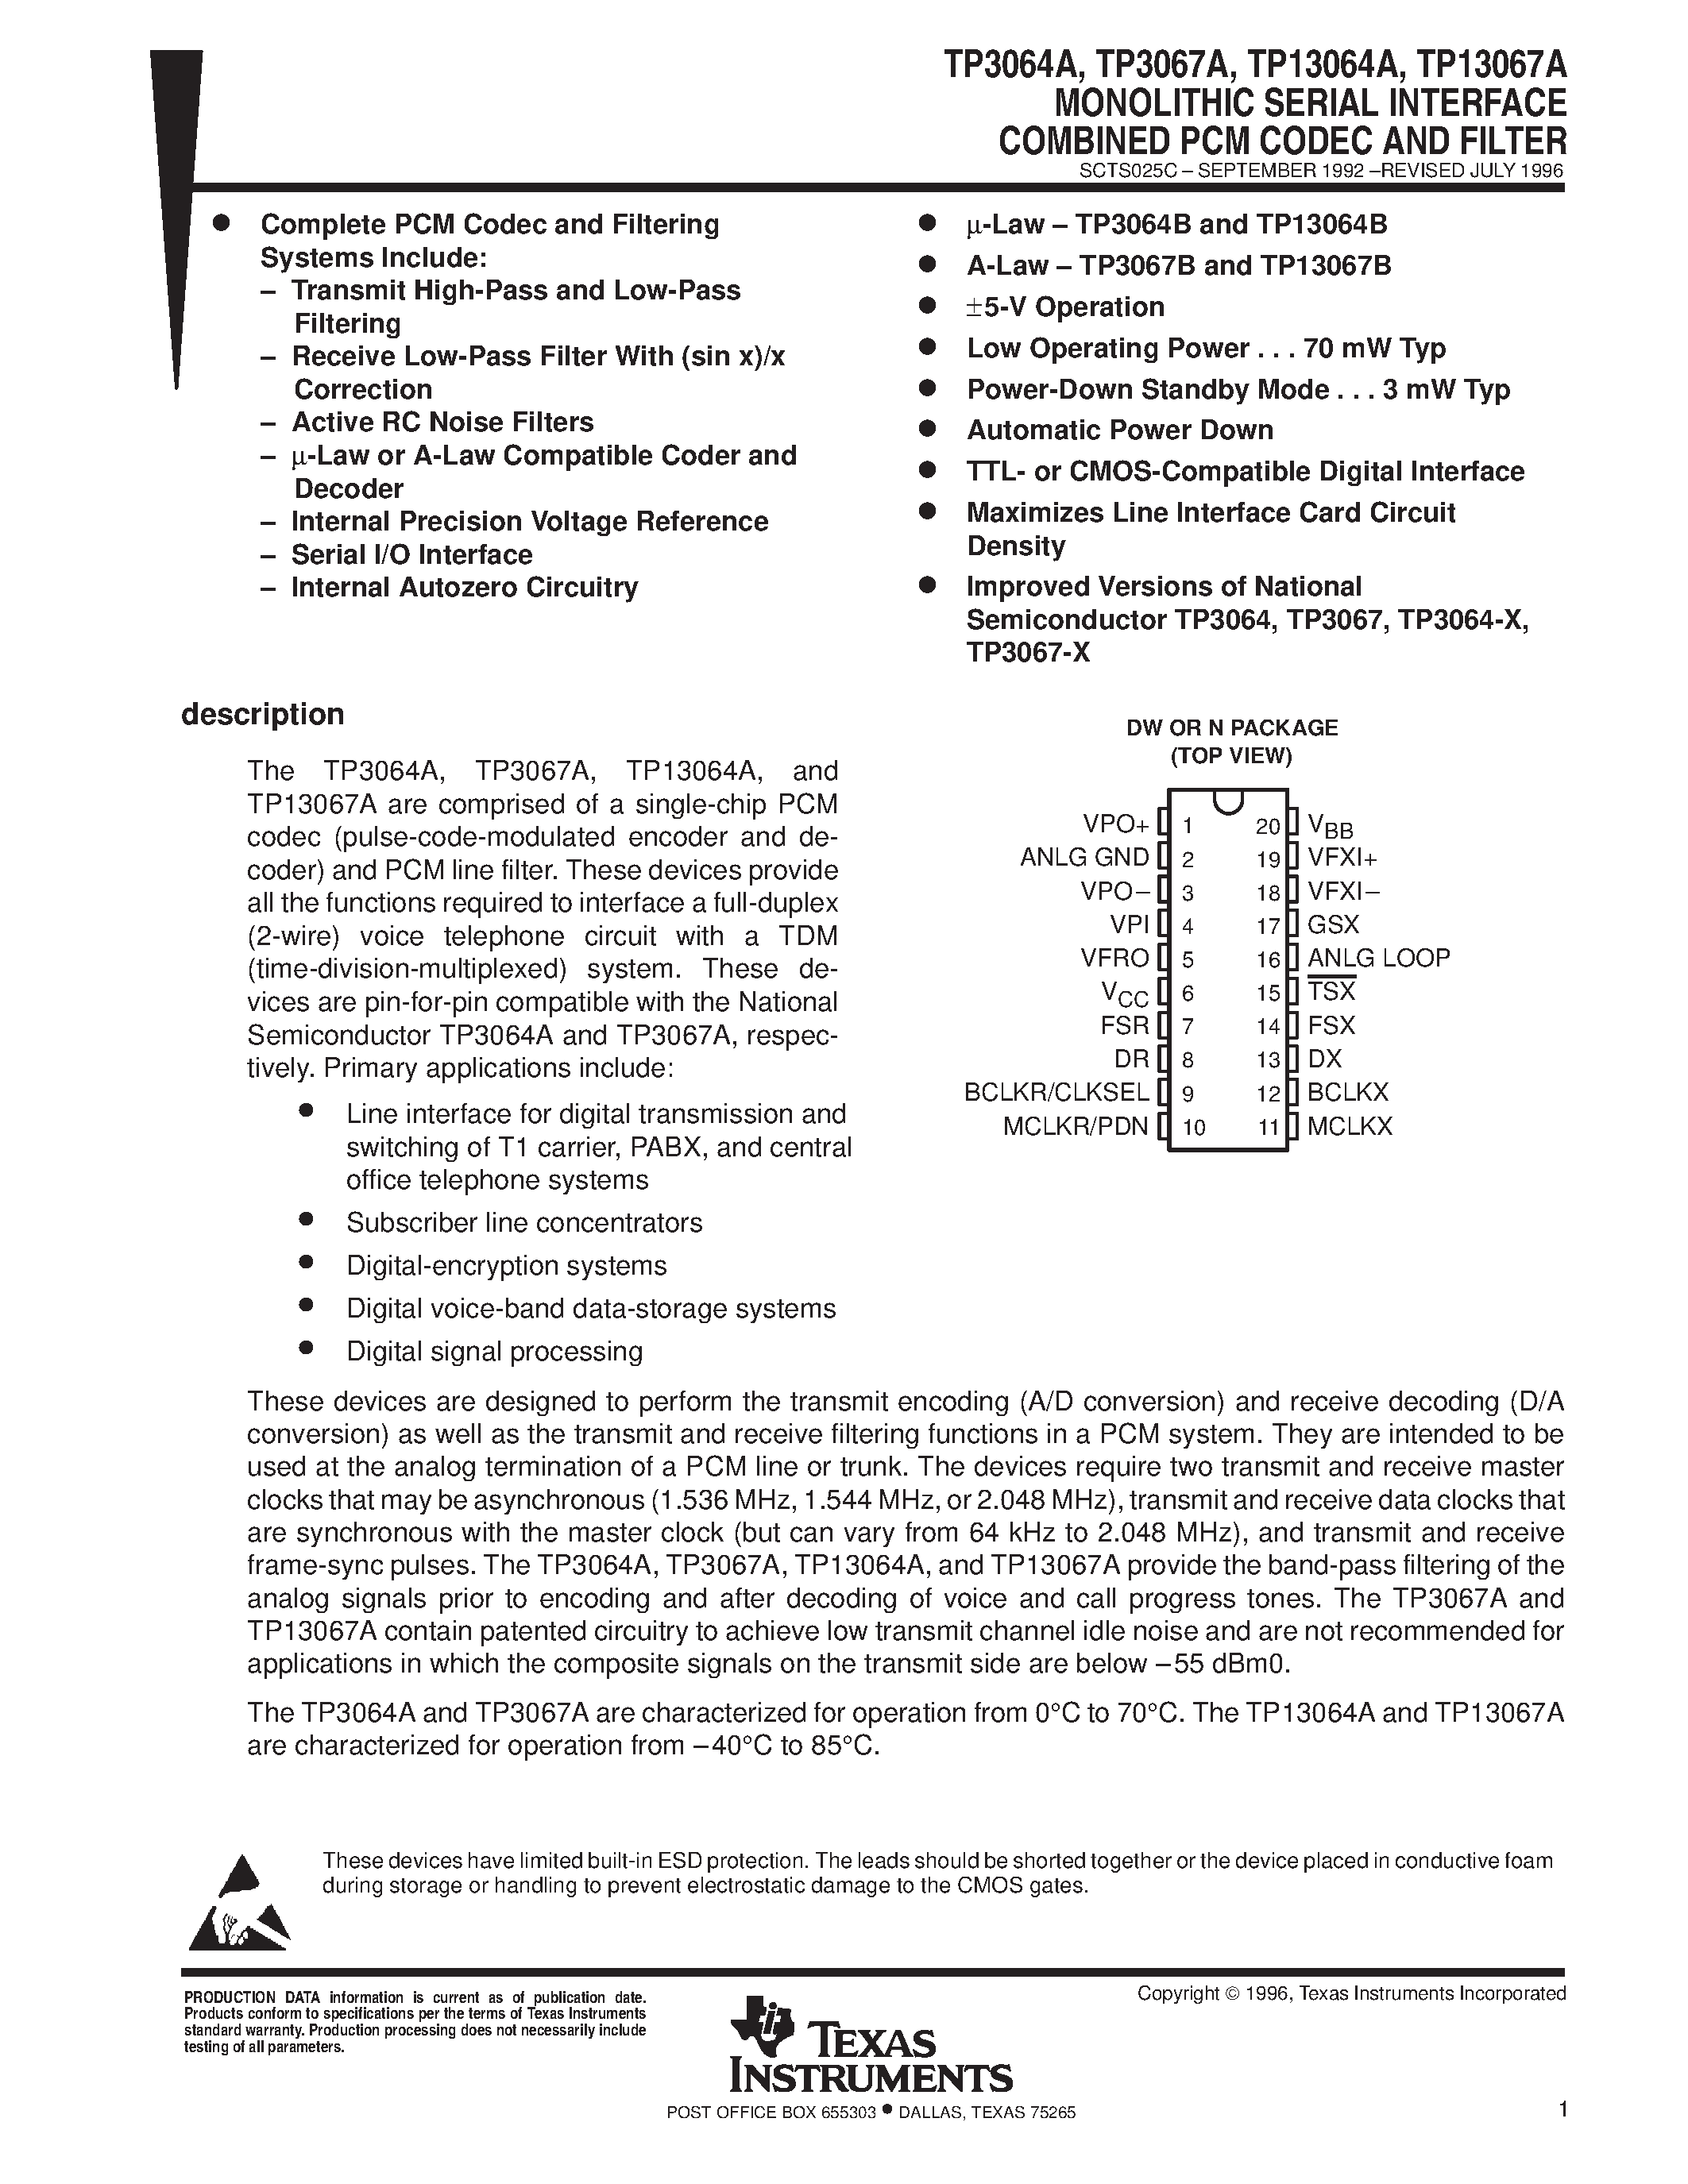 Datasheet TP13064A - MONOLITHIC SERIAL INTERFACE COMBINED PCM CODEC AND FILTER page 1